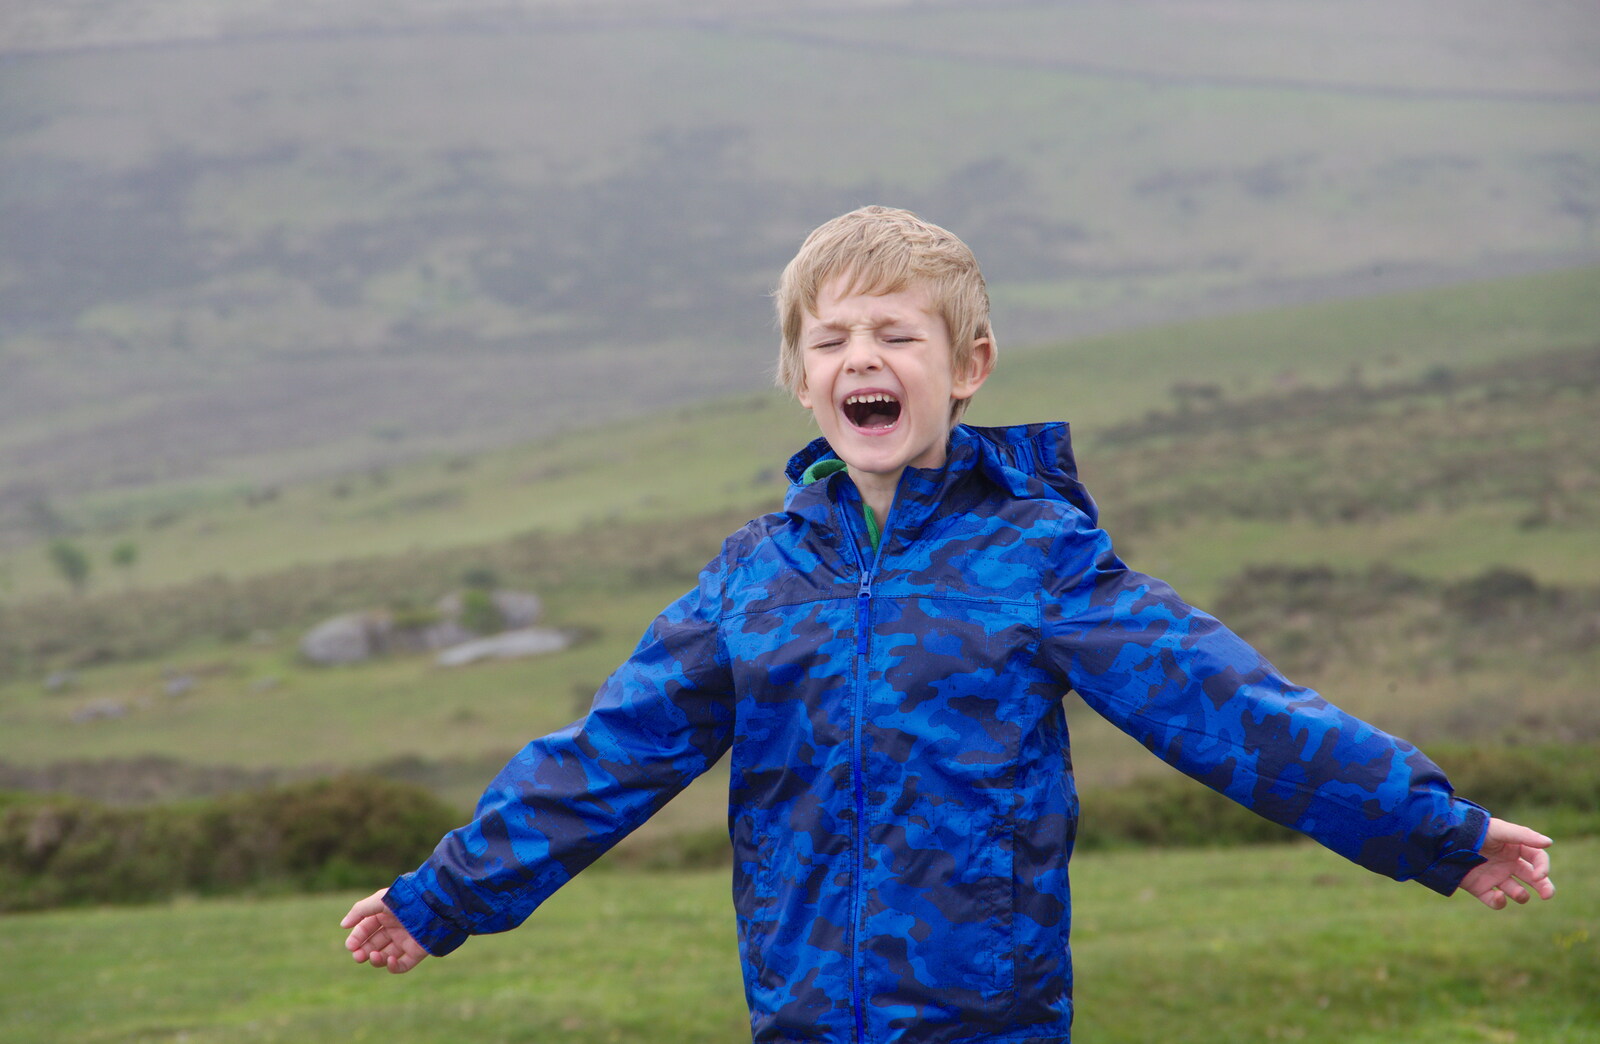 Harry shouts at the wind from The Tom Cobley and a Return to Haytor, Bovey Tracey, Devon - 27th May 2019